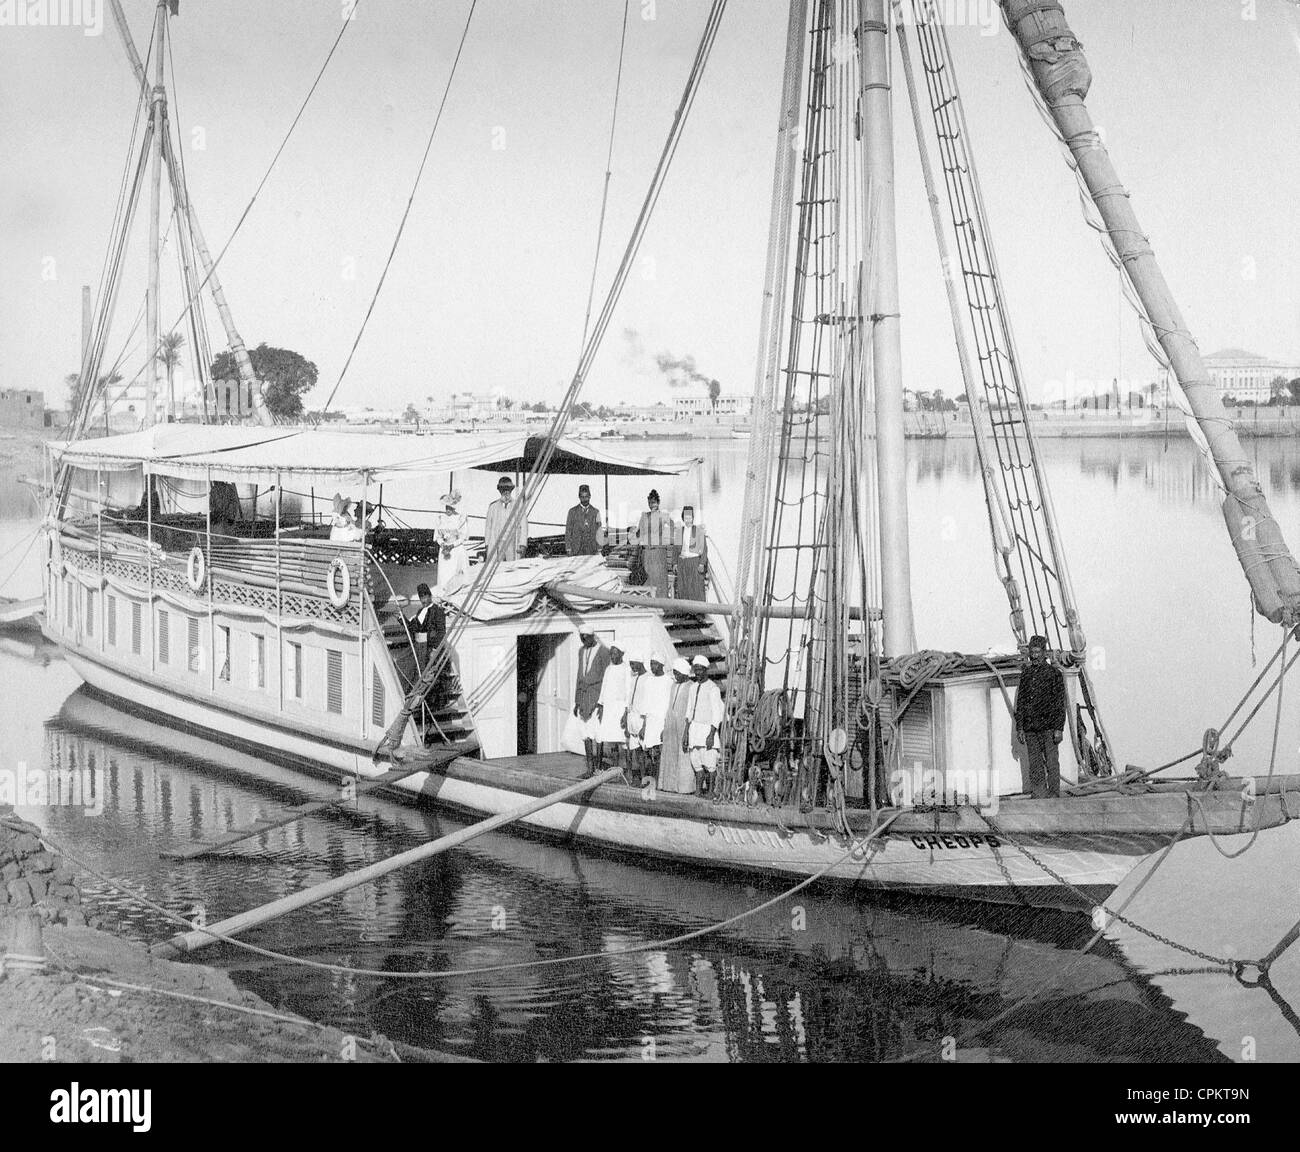 Sail boats on the Nile, around 1910 Stock Photo